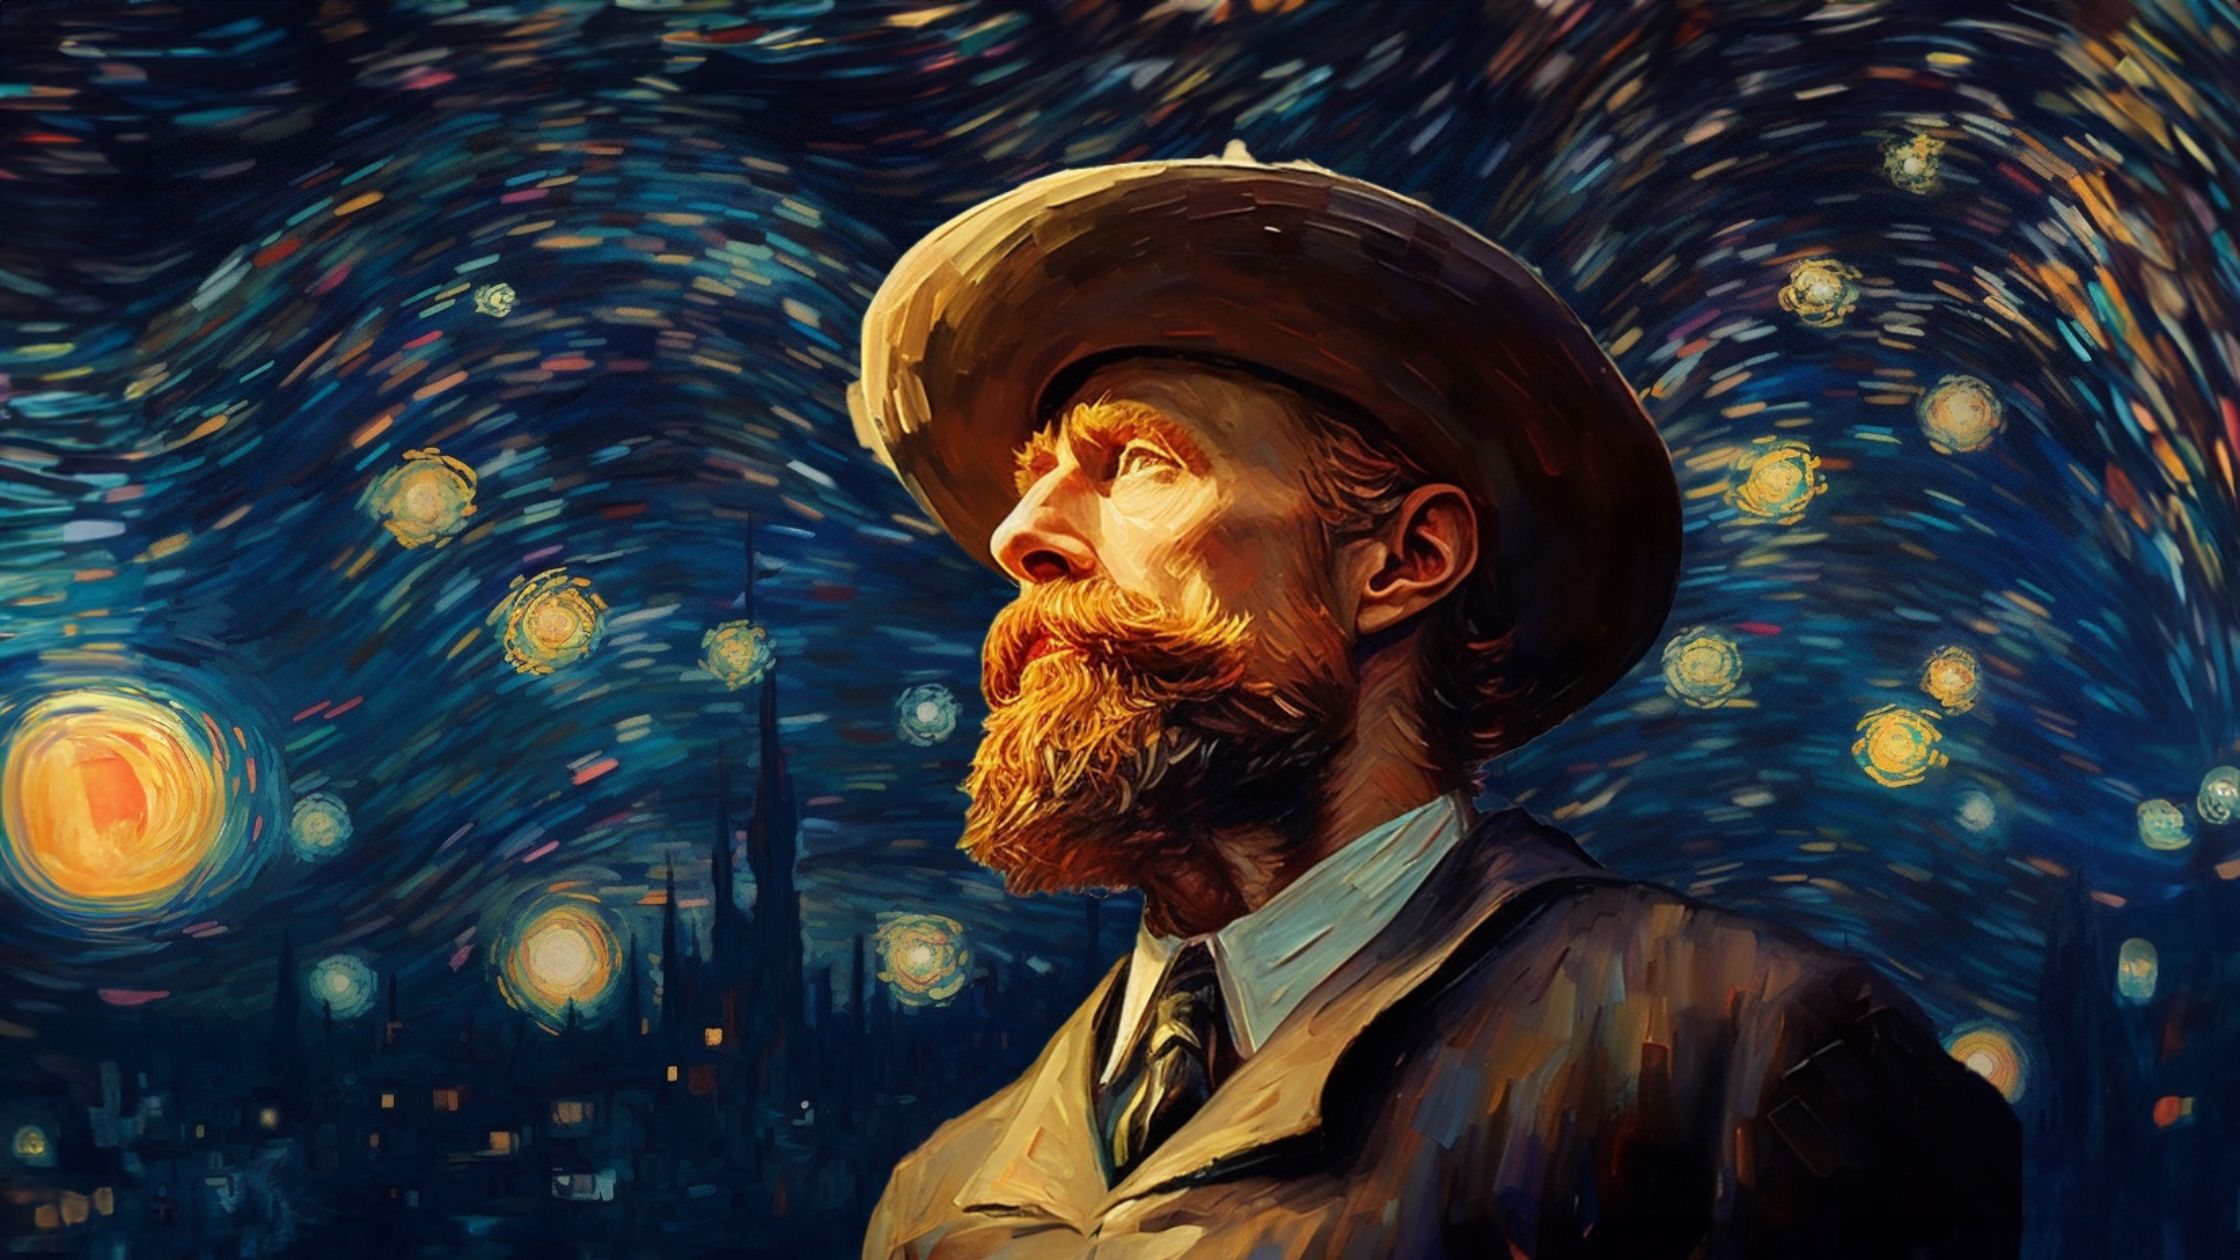 Vincent under the Starry Night of His Calling